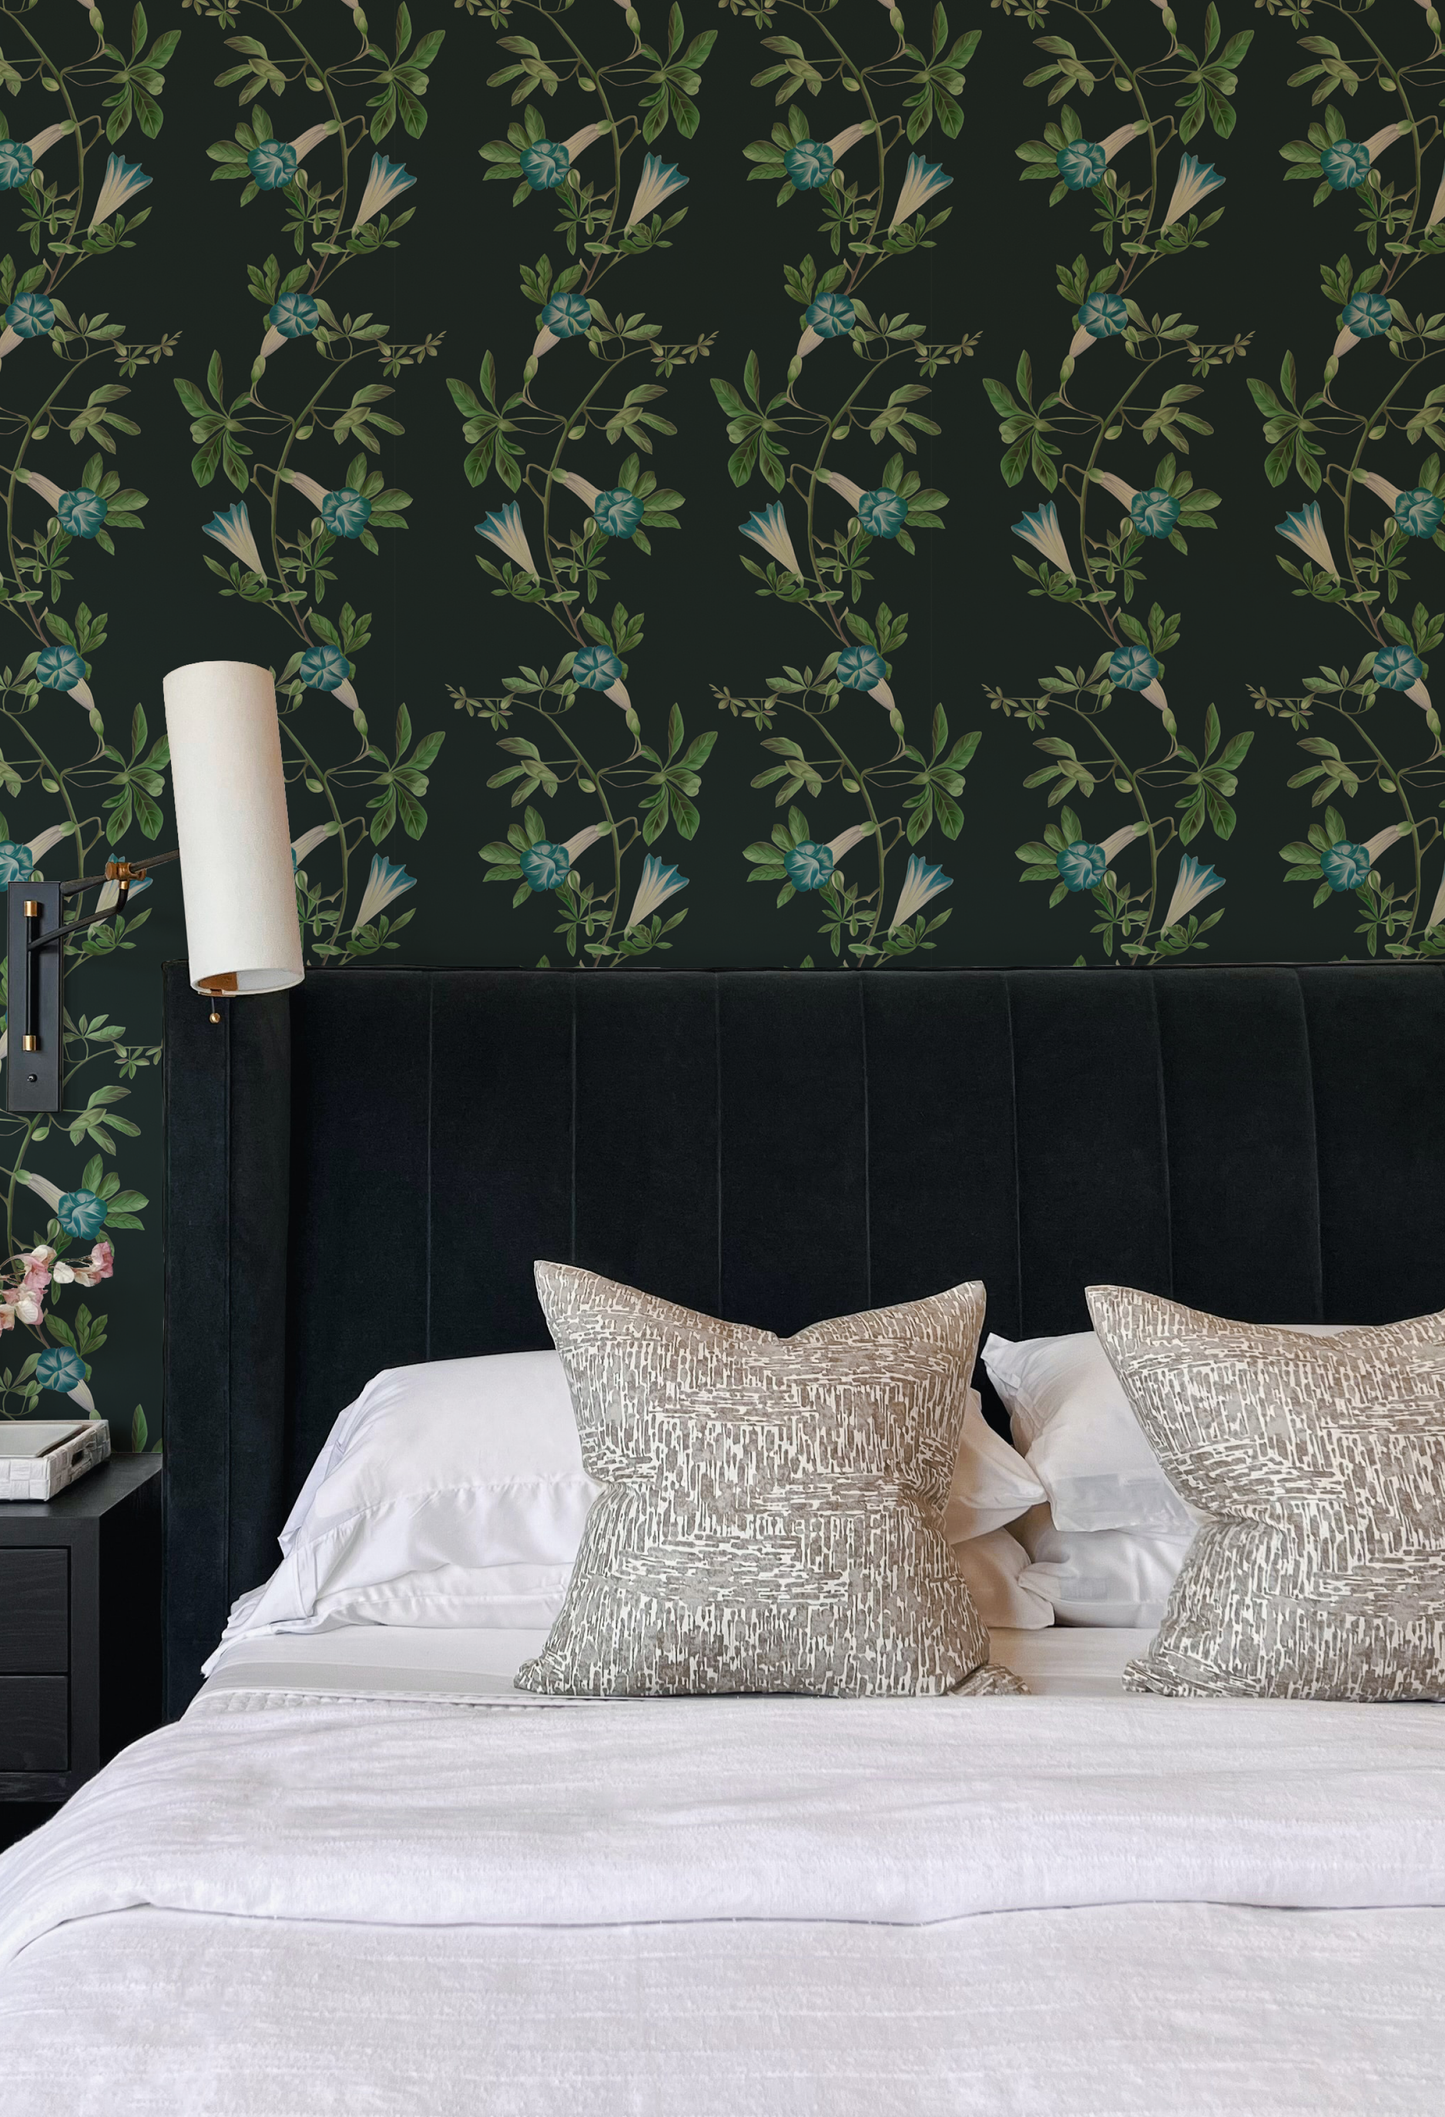 A luxury bedroom with blue floral vine pattern on a black background wallpaper of Midsummer in Charcoal by Deus ex Gardenia. Photo by MK-S.